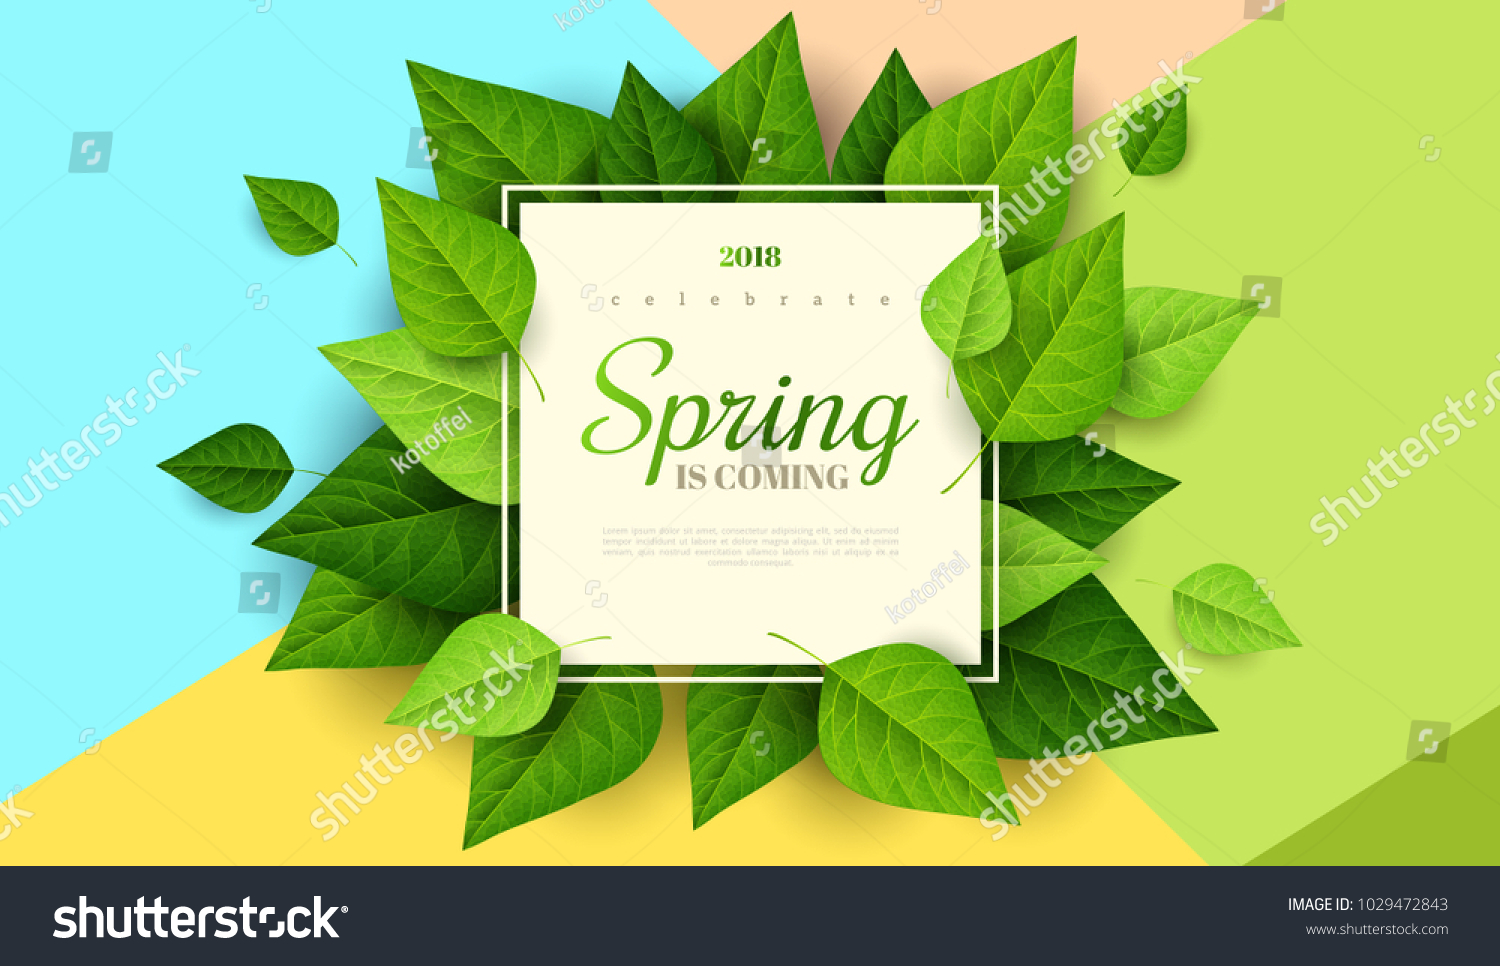 Spring background with green leaves and square frame on trendy geometric backdrop. Vector illustration. Fresh template design for posters, flyers, brochures or vouchers. #1029472843